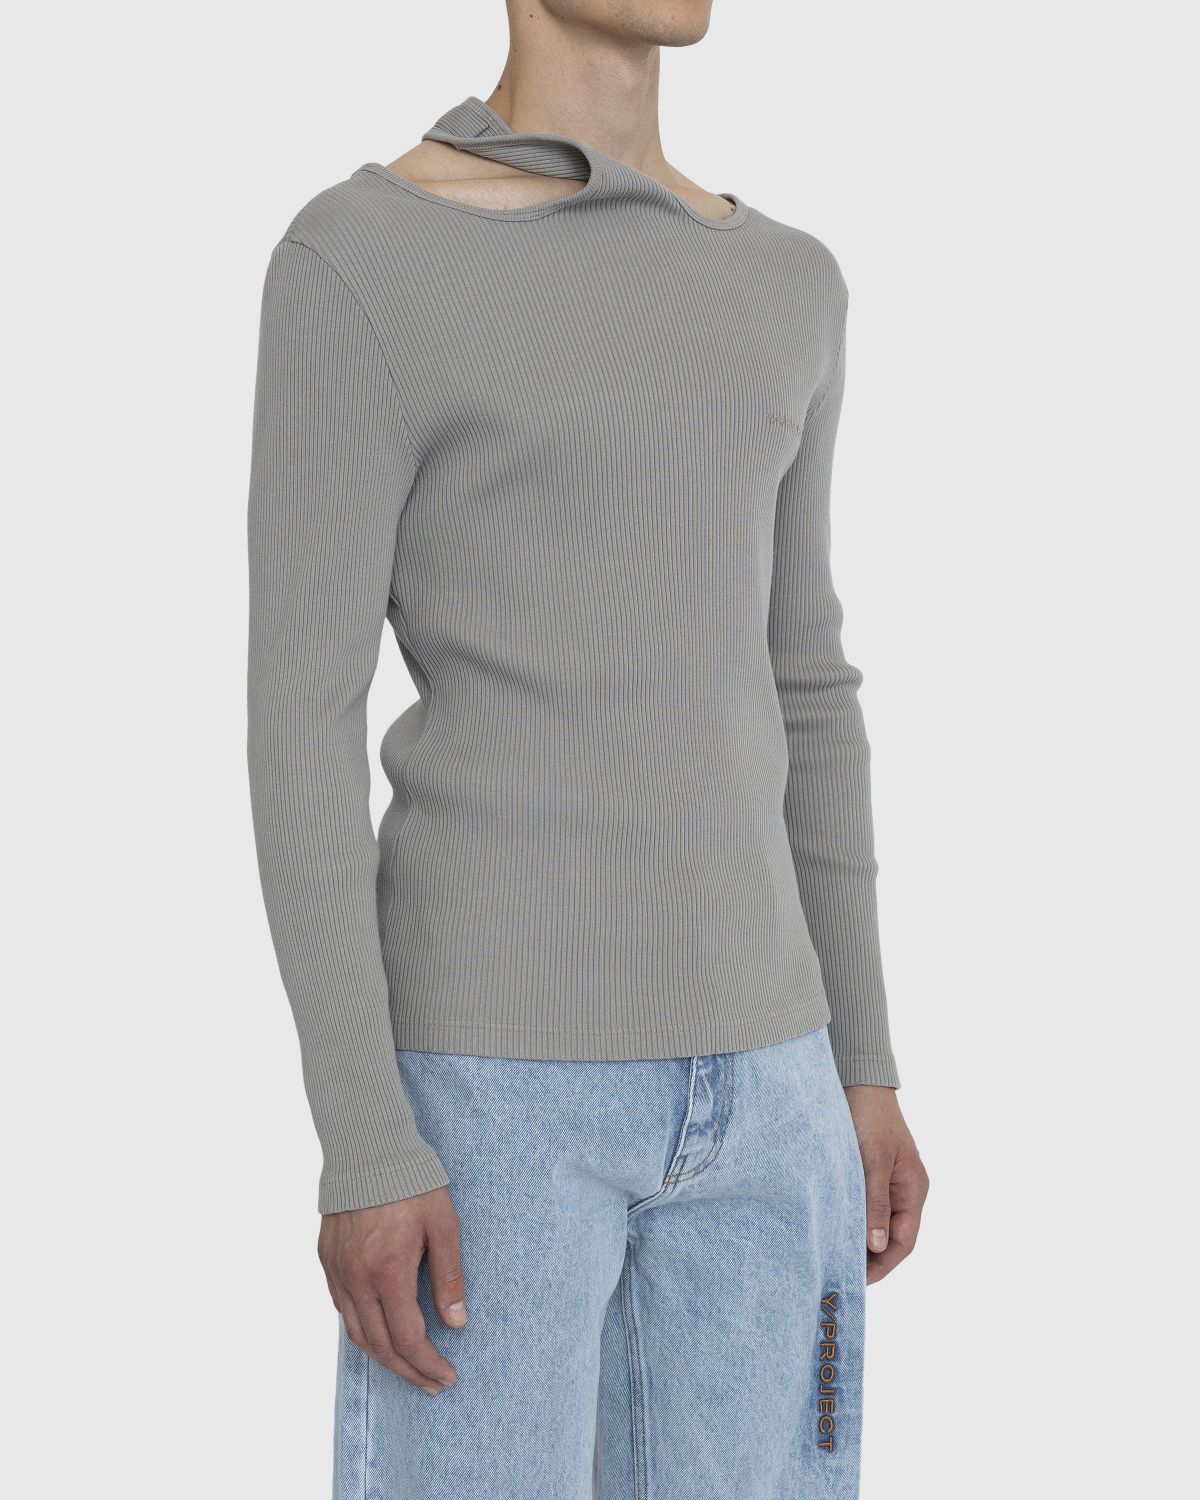 Y/Project – Classic Double Collar T-Shirt Taupe - Tops - Grey - Image 3